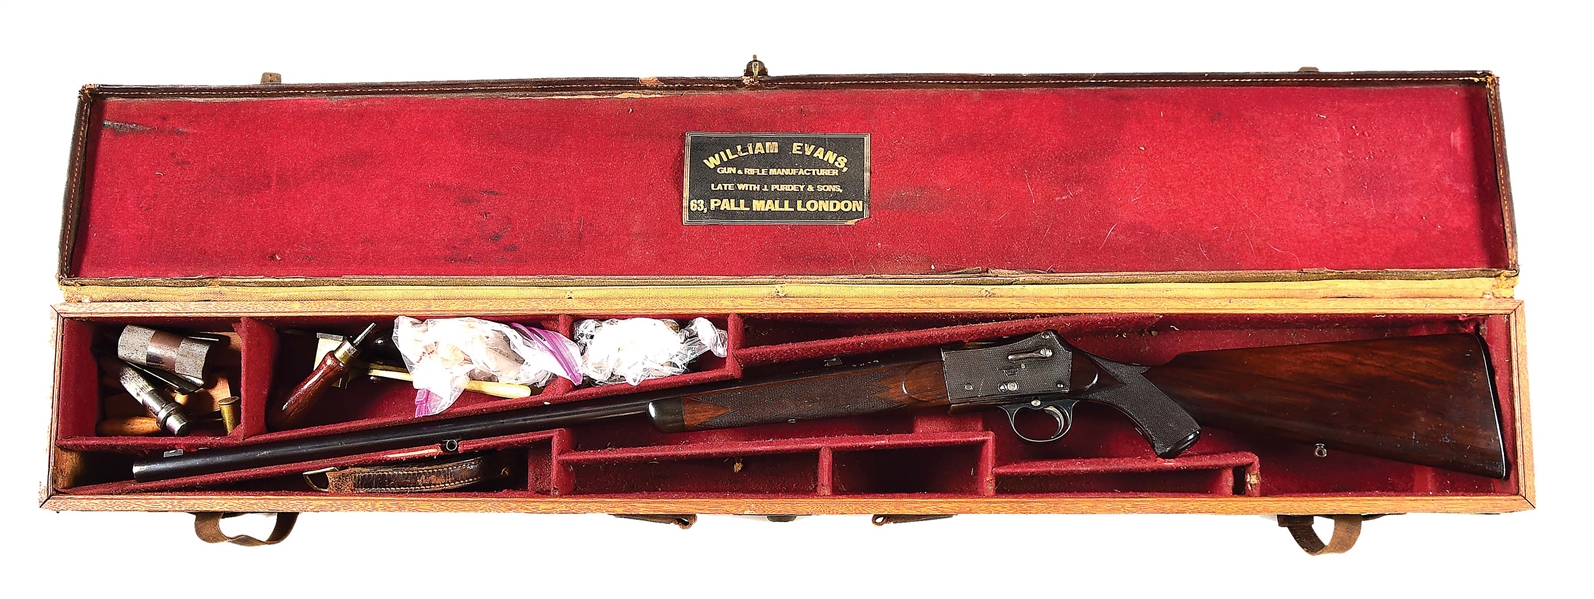 (A) RARE FIELDS PATENT PIVOTING BLOCK SINGLE SHOT RIFLE RETAILED BY W.W. GREENER WITH CASE AND ACCESSORIES.